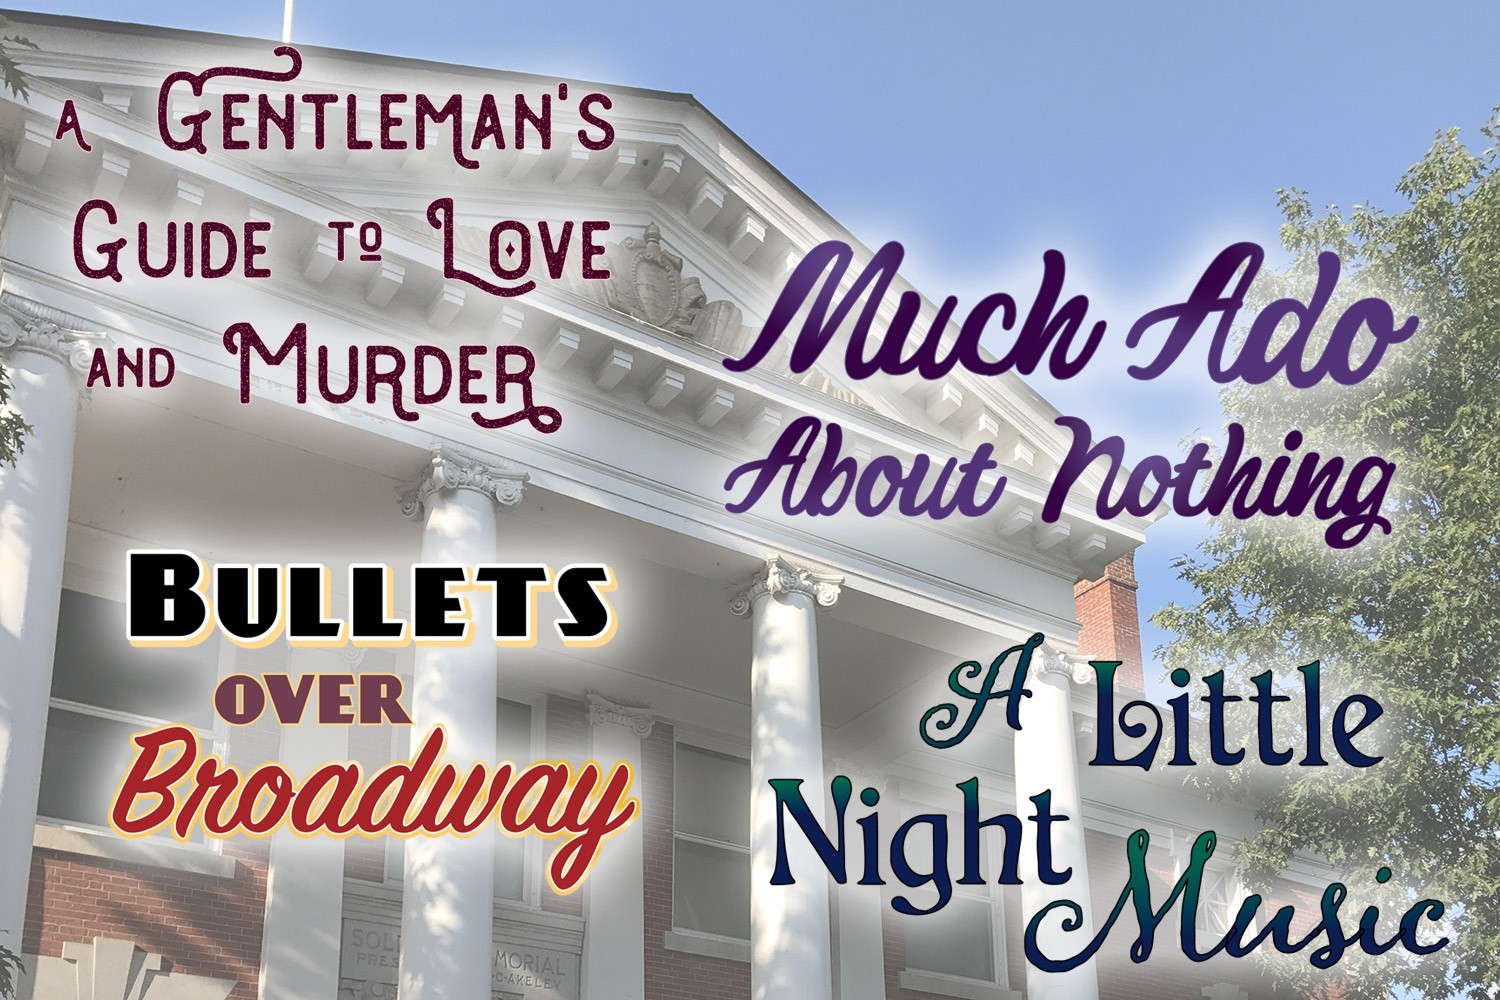 A Gentleman's Guide to Love and Murder, Much Ado About Nothing, Bullets Over Broadway, A Little Night Music